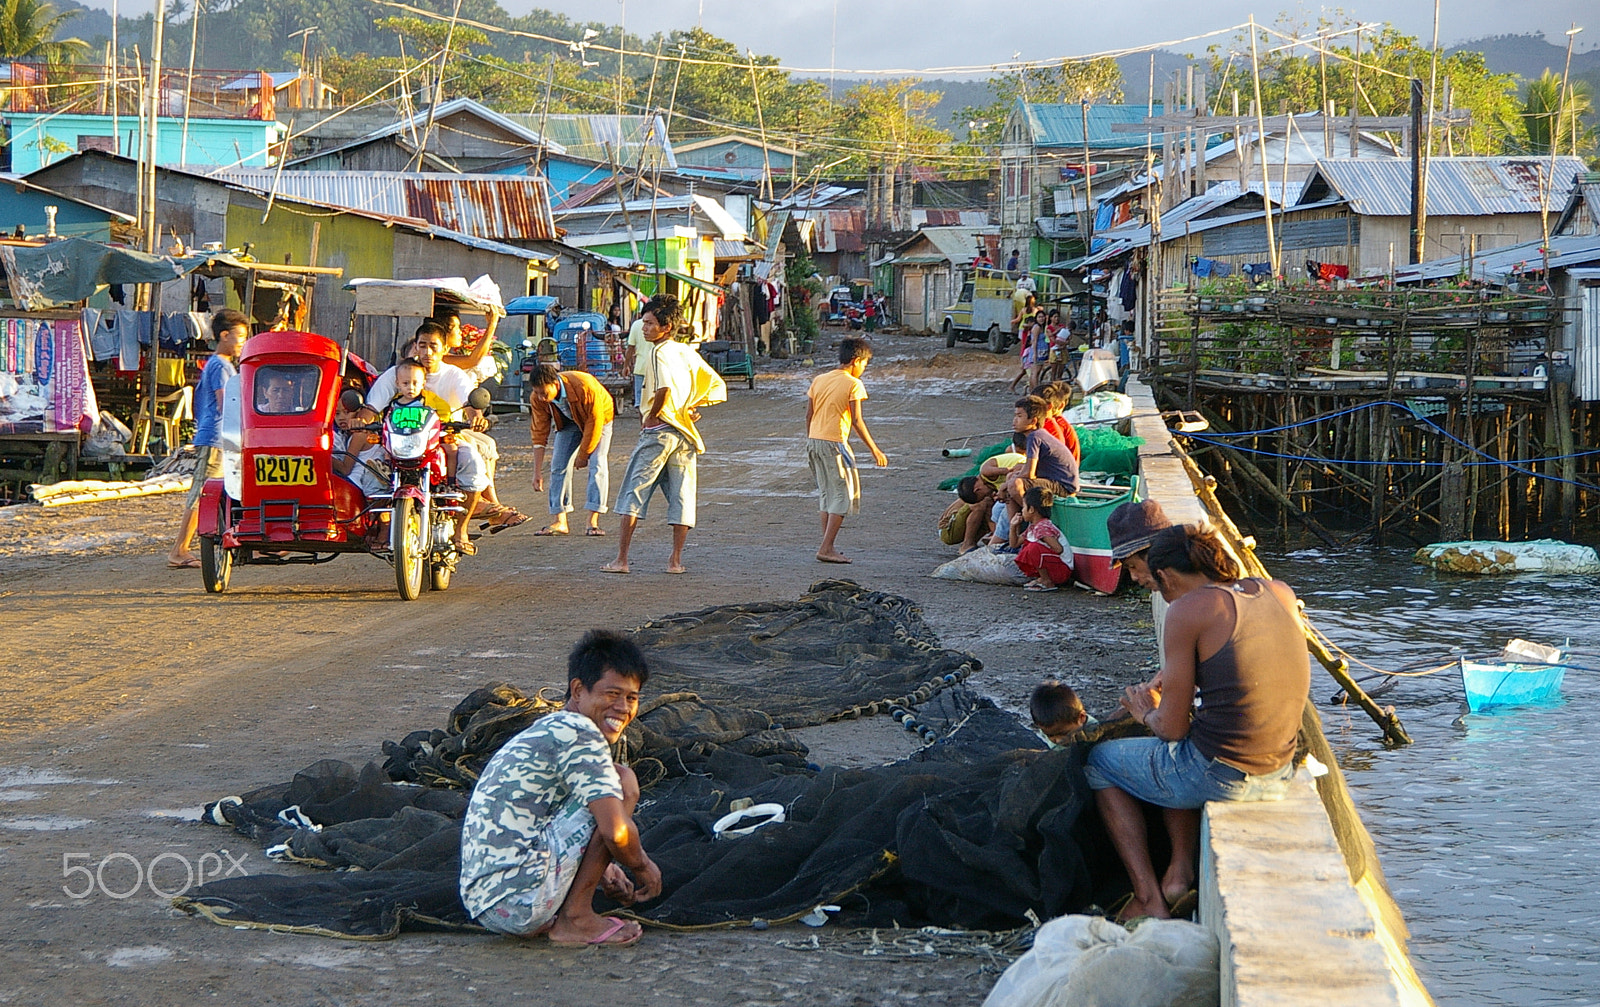 Pentax *ist DS sample photo. Urban life in outskirt of masbate, philippines photography